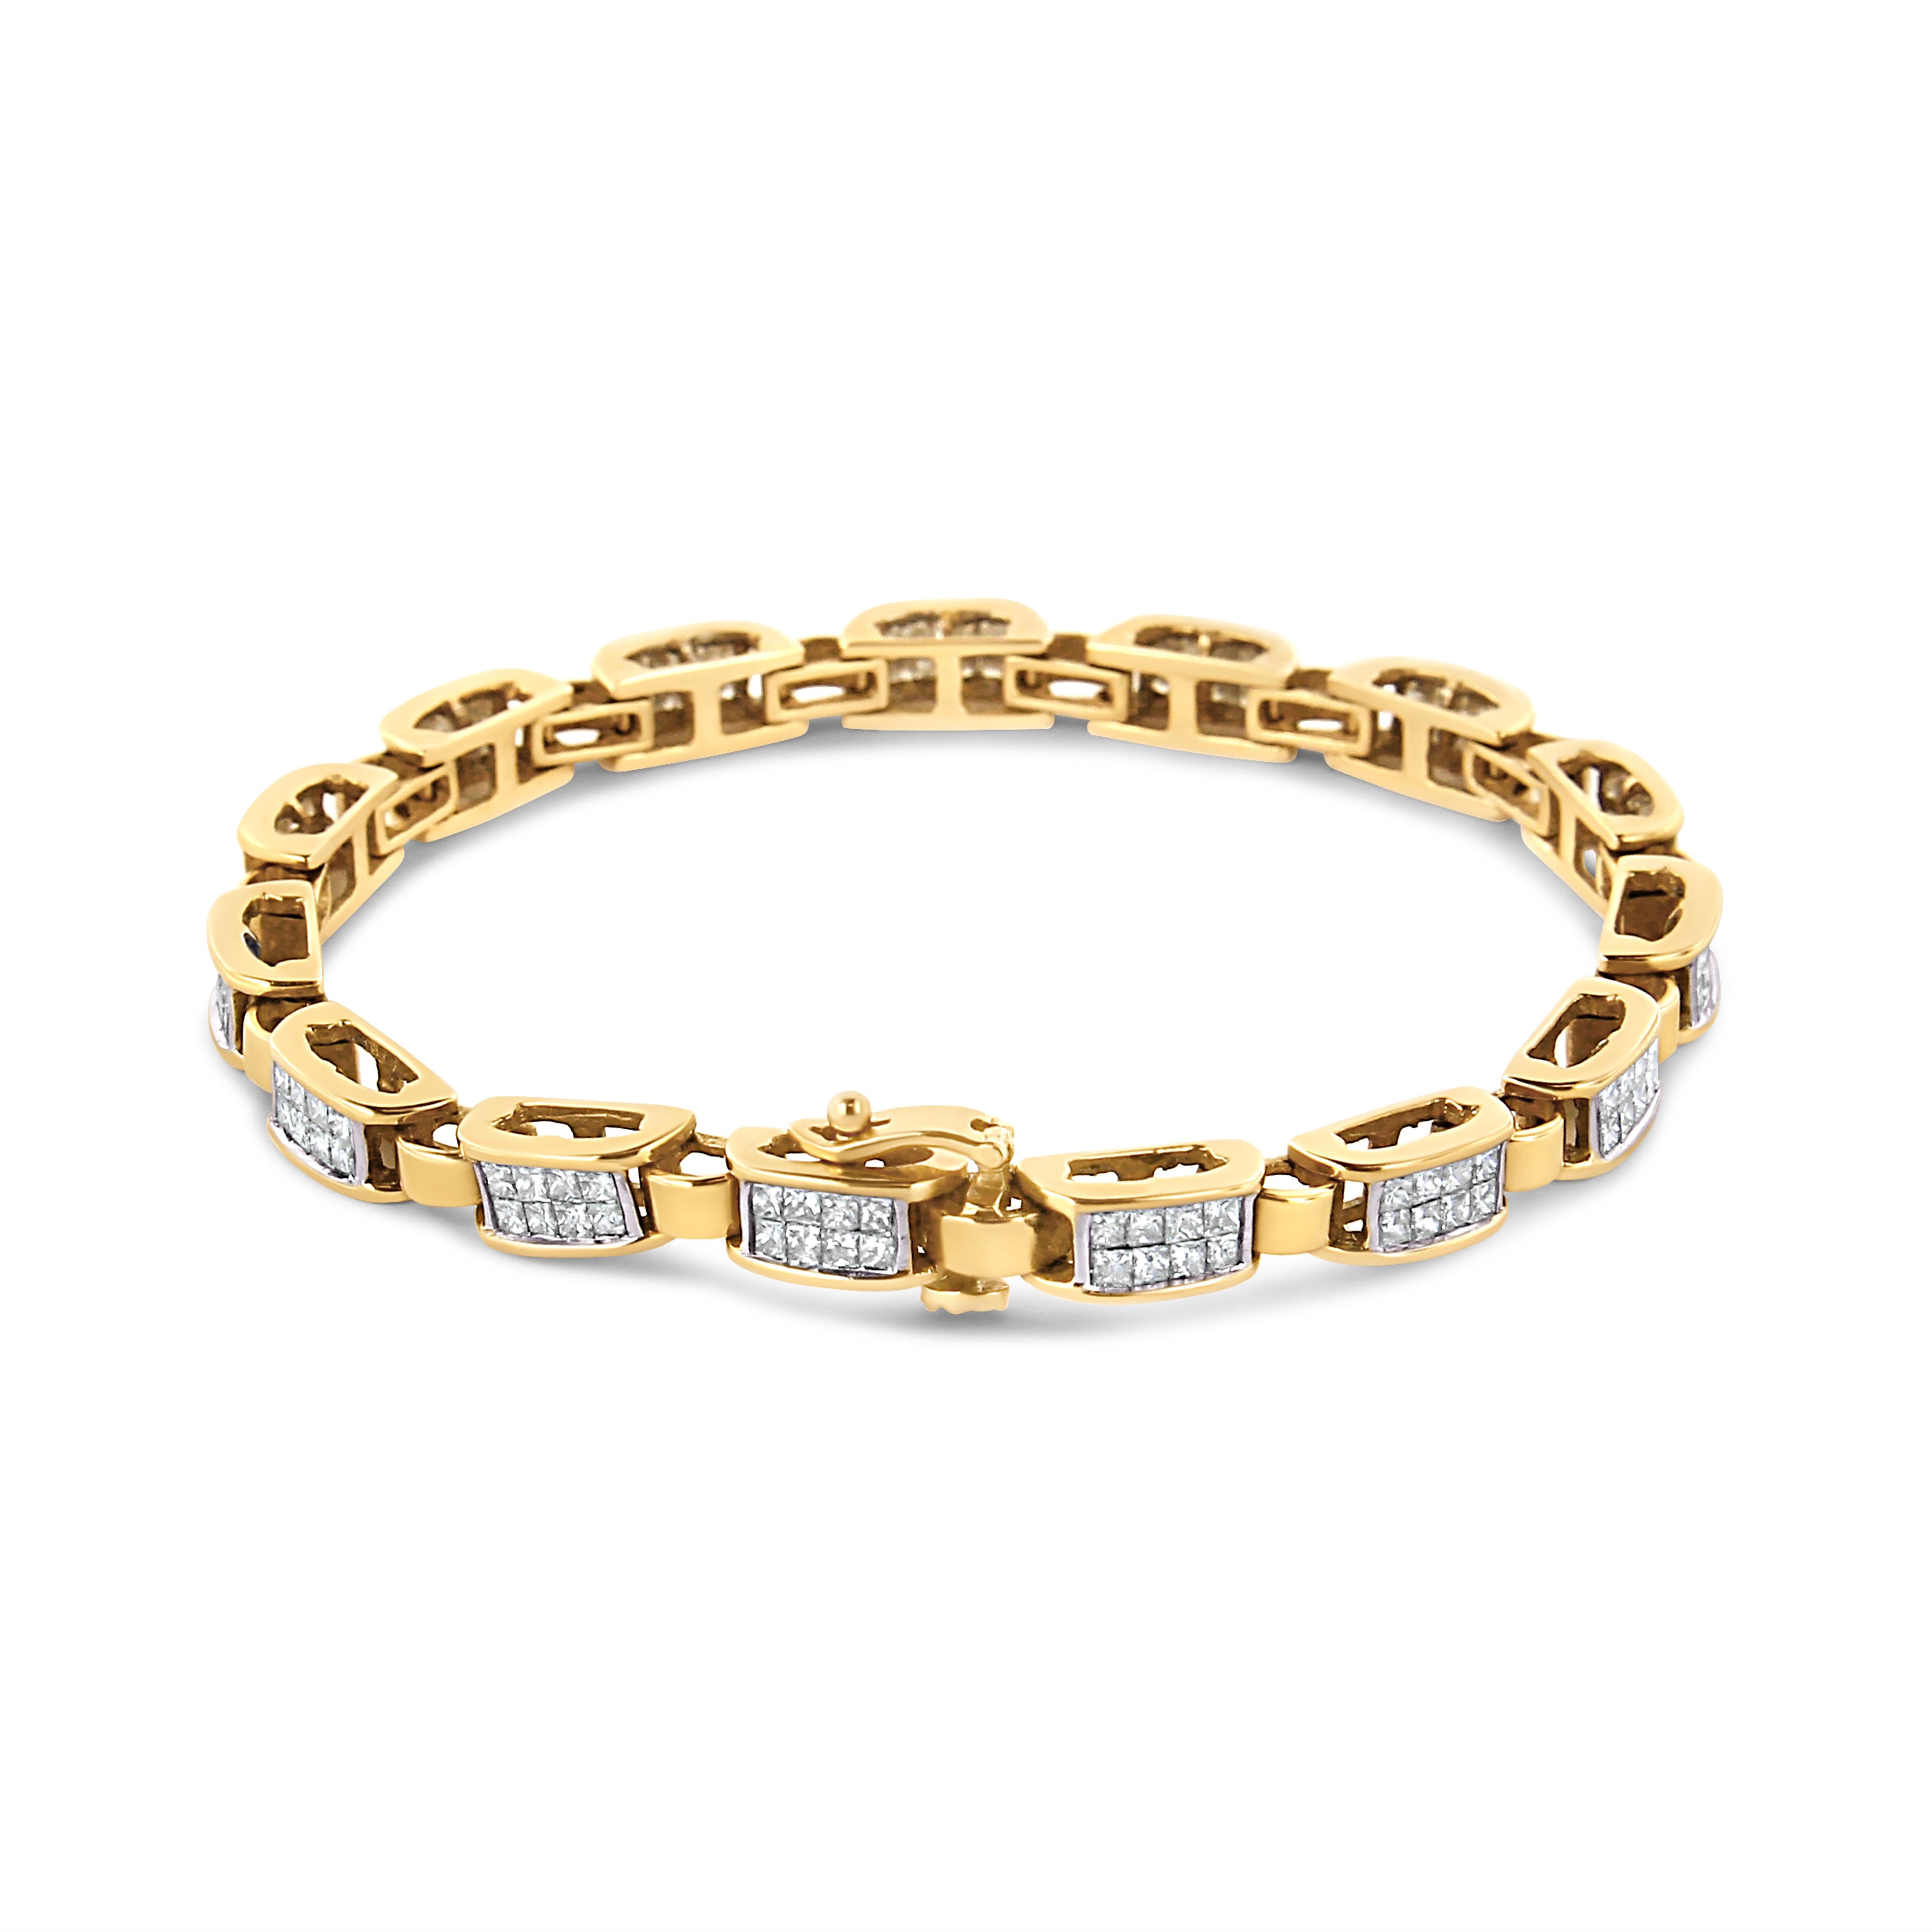 This geometric pattern link bracelet is a timeless piece. Small yellow gold bands link with larger bands inlaid with eight princess cut diamonds. 2 1/2ct TDW in diamonds shine in this design. A box with clasp mechanism keeps this 14k yellow gold